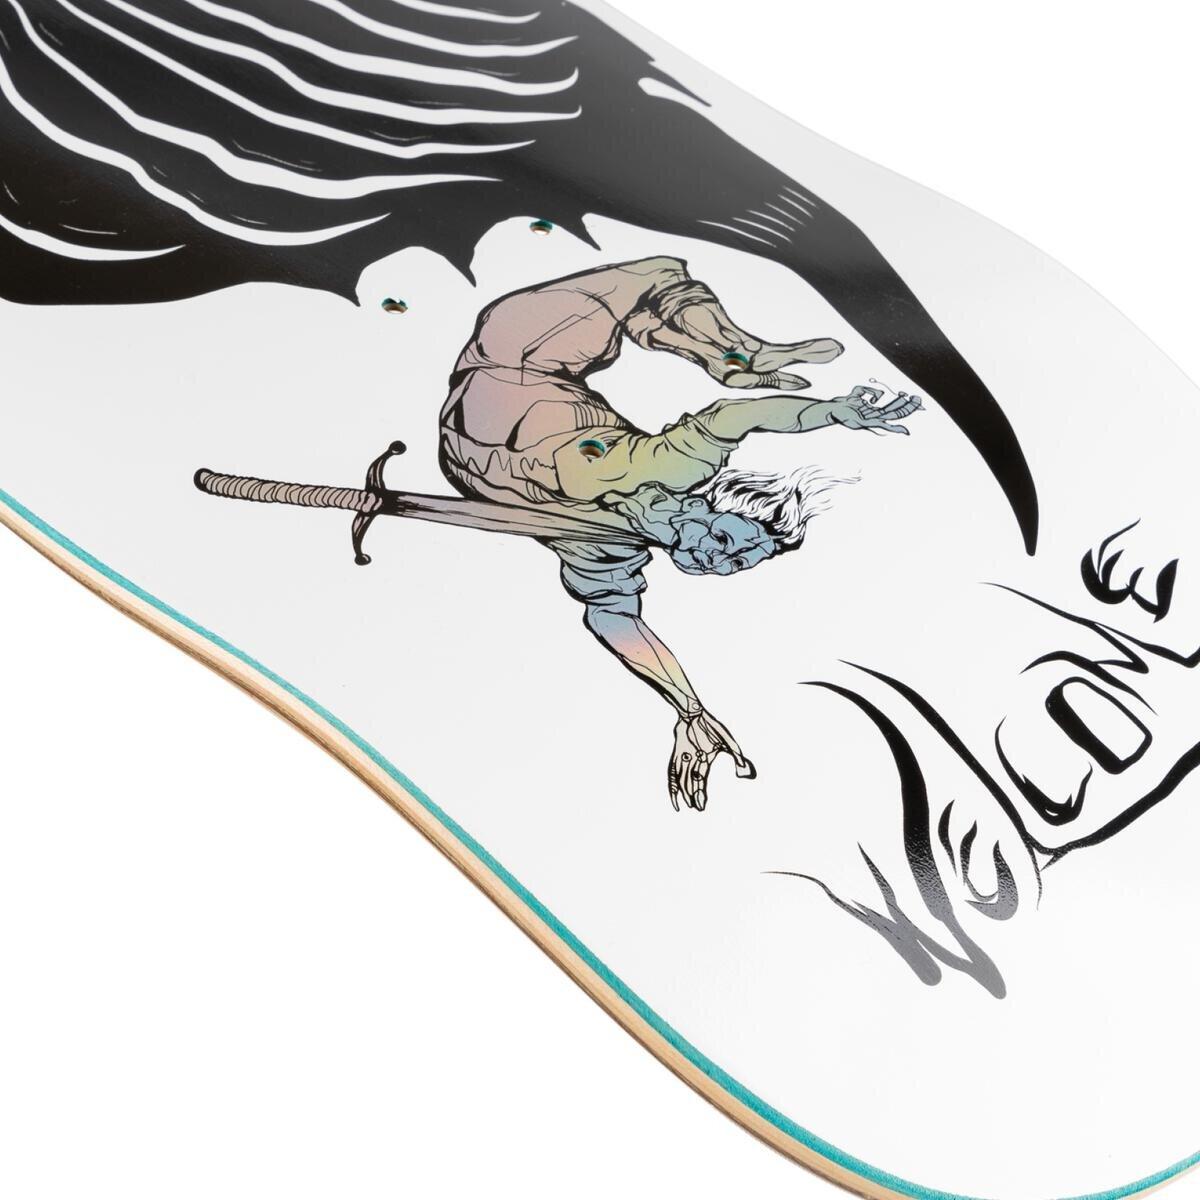 FIRE SALE Welcome Skateboards "ISOBEL on STONECIPHER" 8.6" Deck